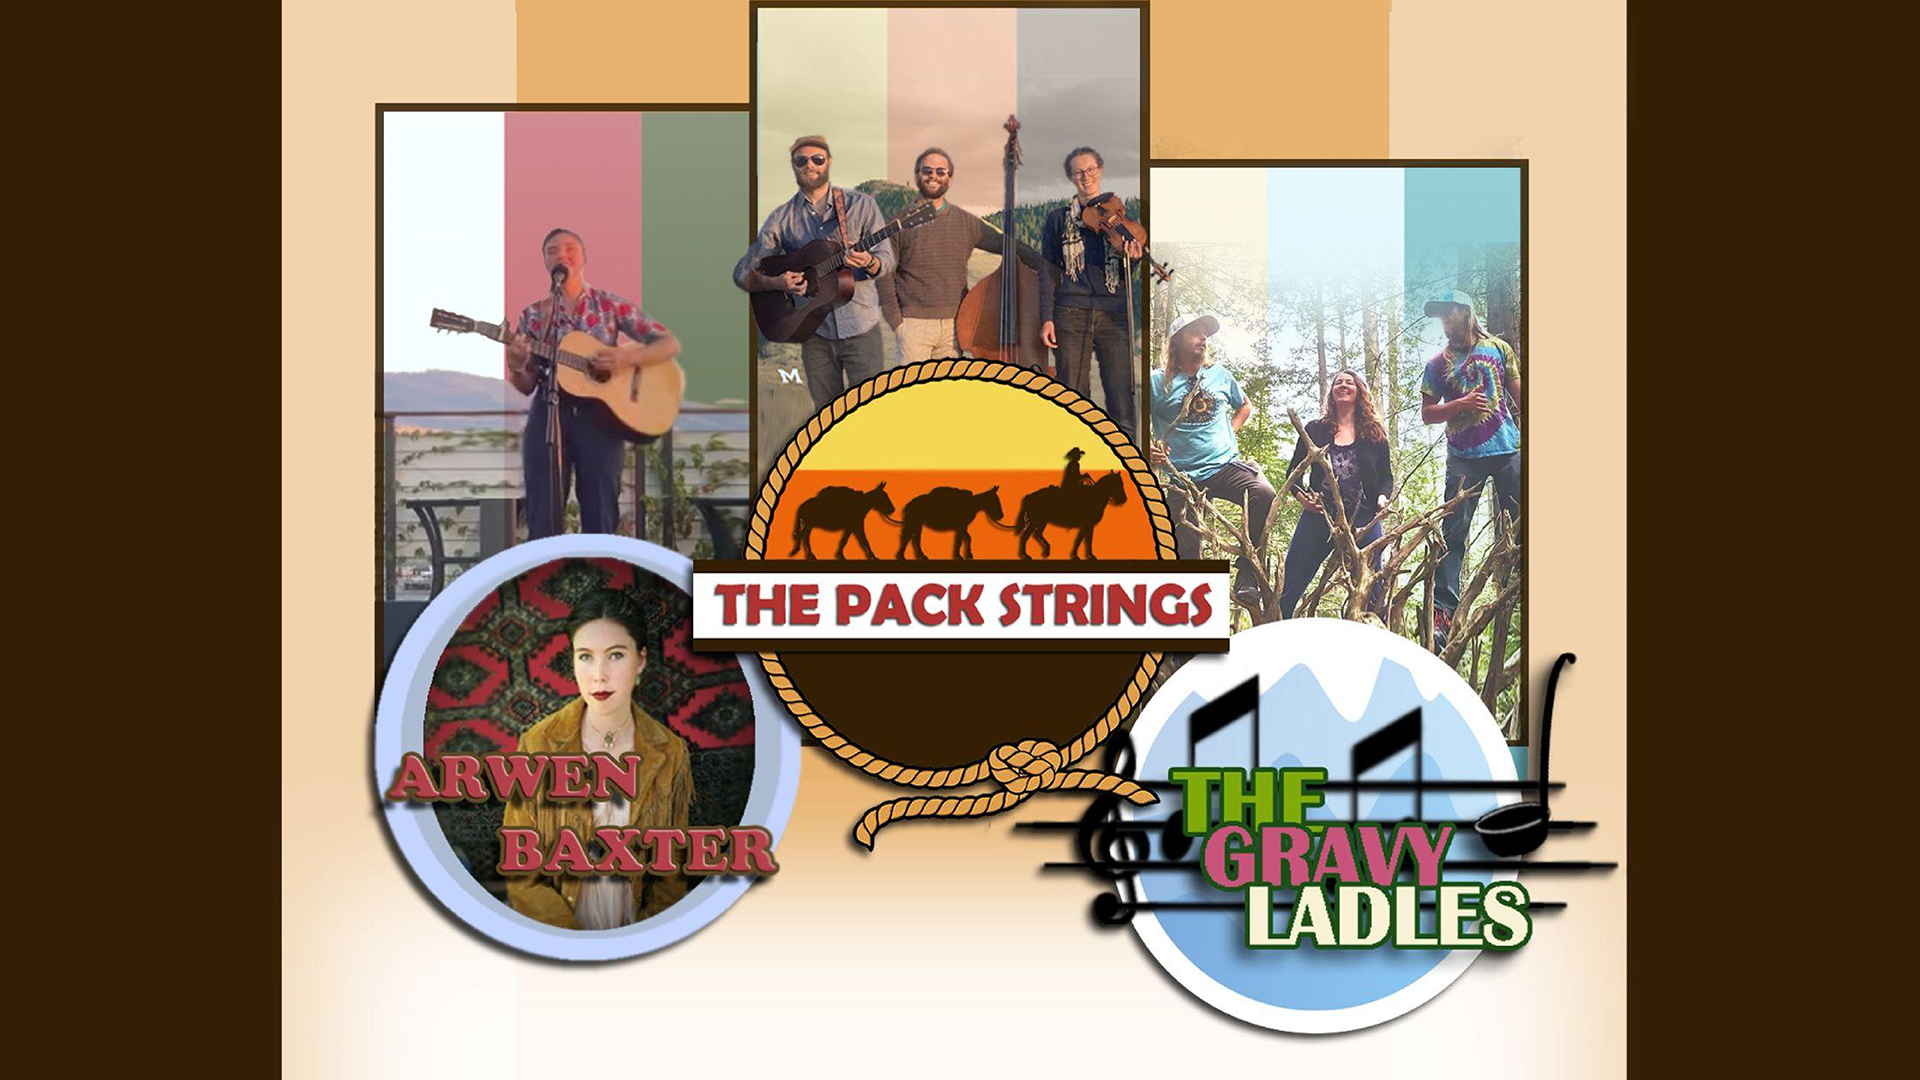 Arwen Baxter + The Gravy Ladles + The Pack Strings at Zootown Arts Community Center on Thursday, March 30